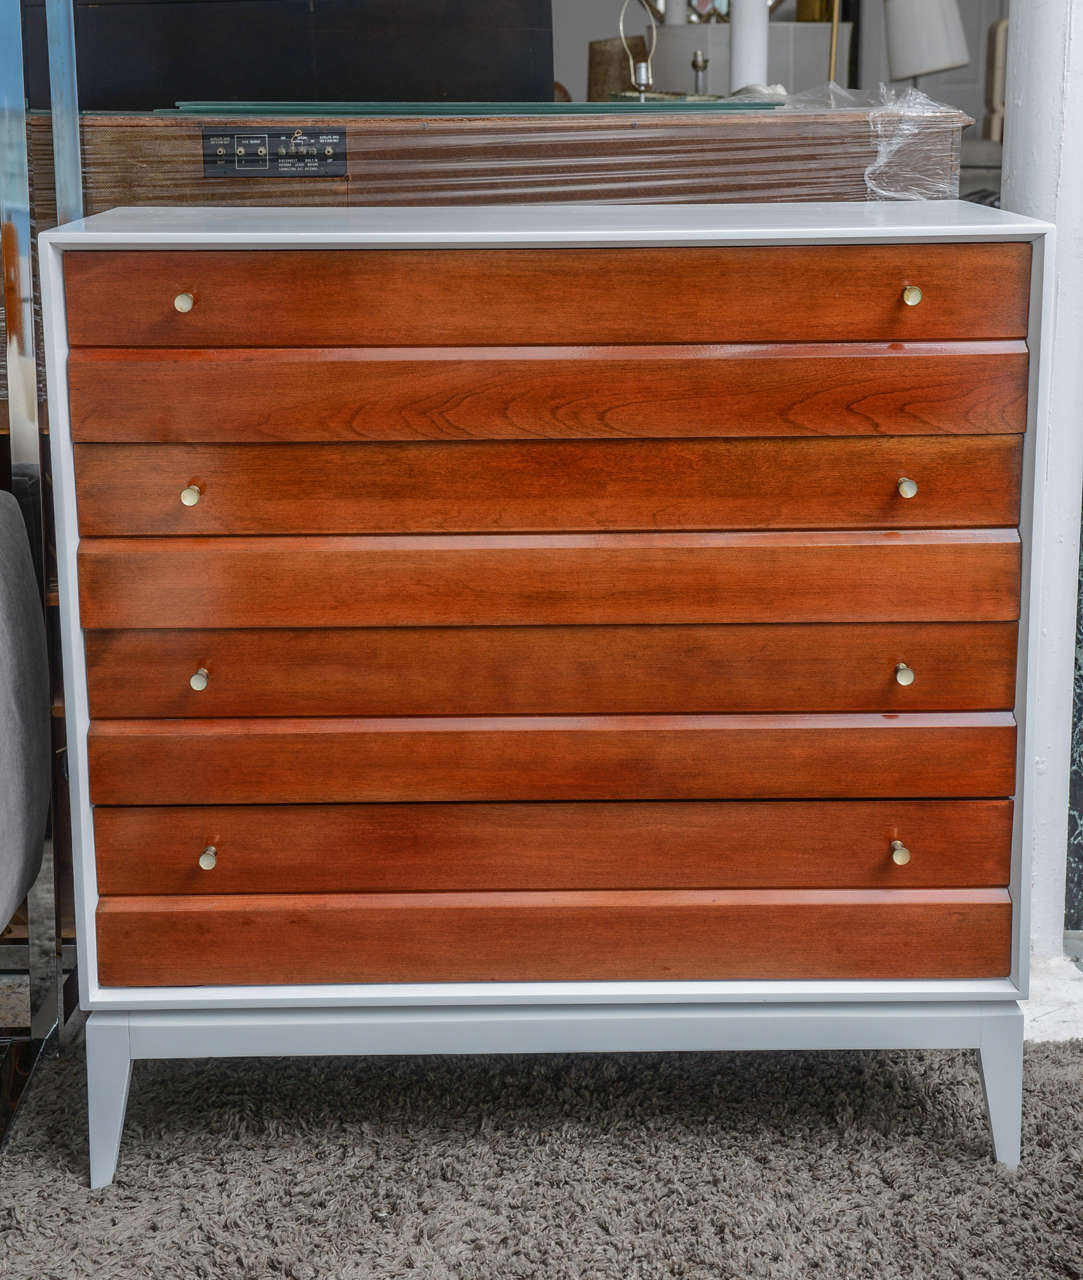 American Heywood Wakefield Dresser with White Lacquer, 1960s, USA Walnut